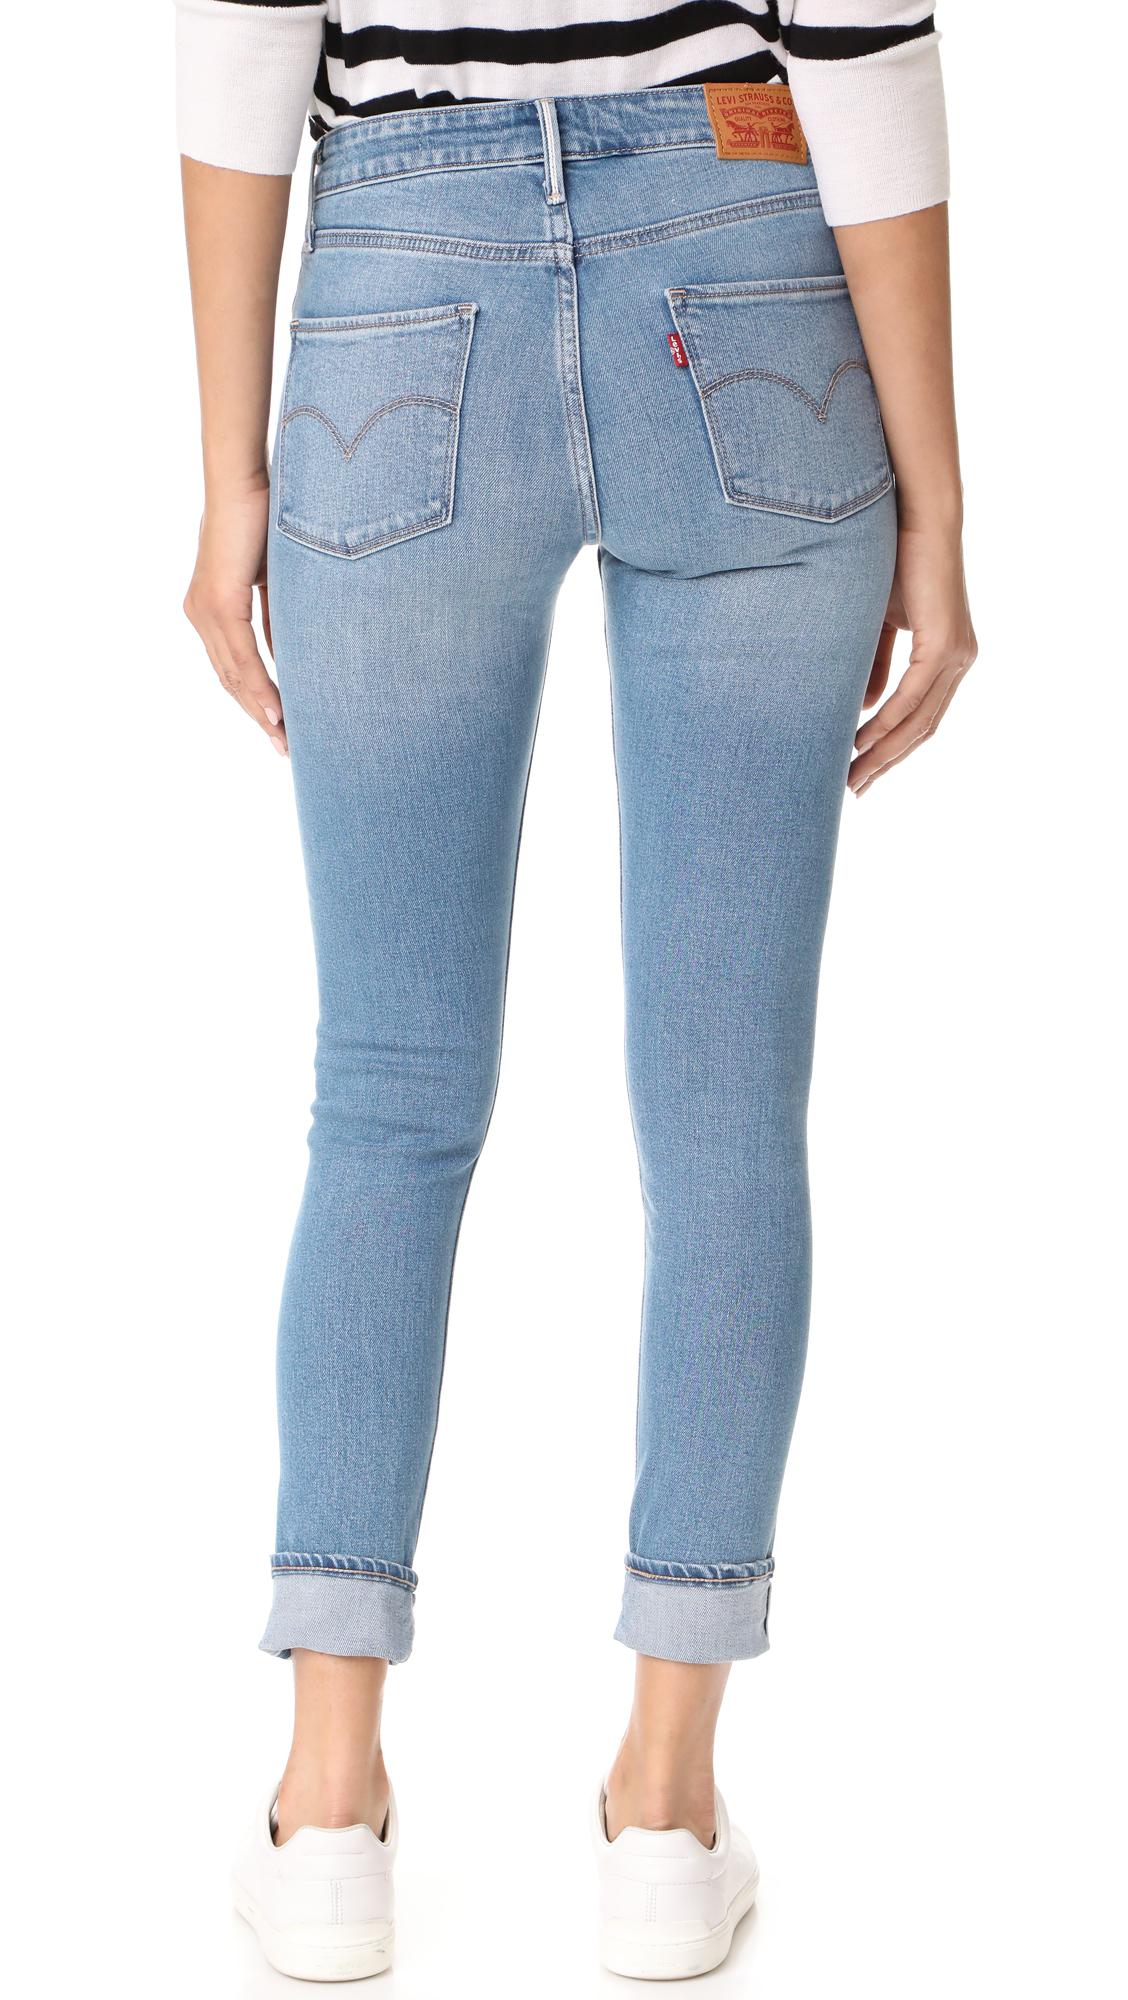 Levis 721 high waisted skinny jeans